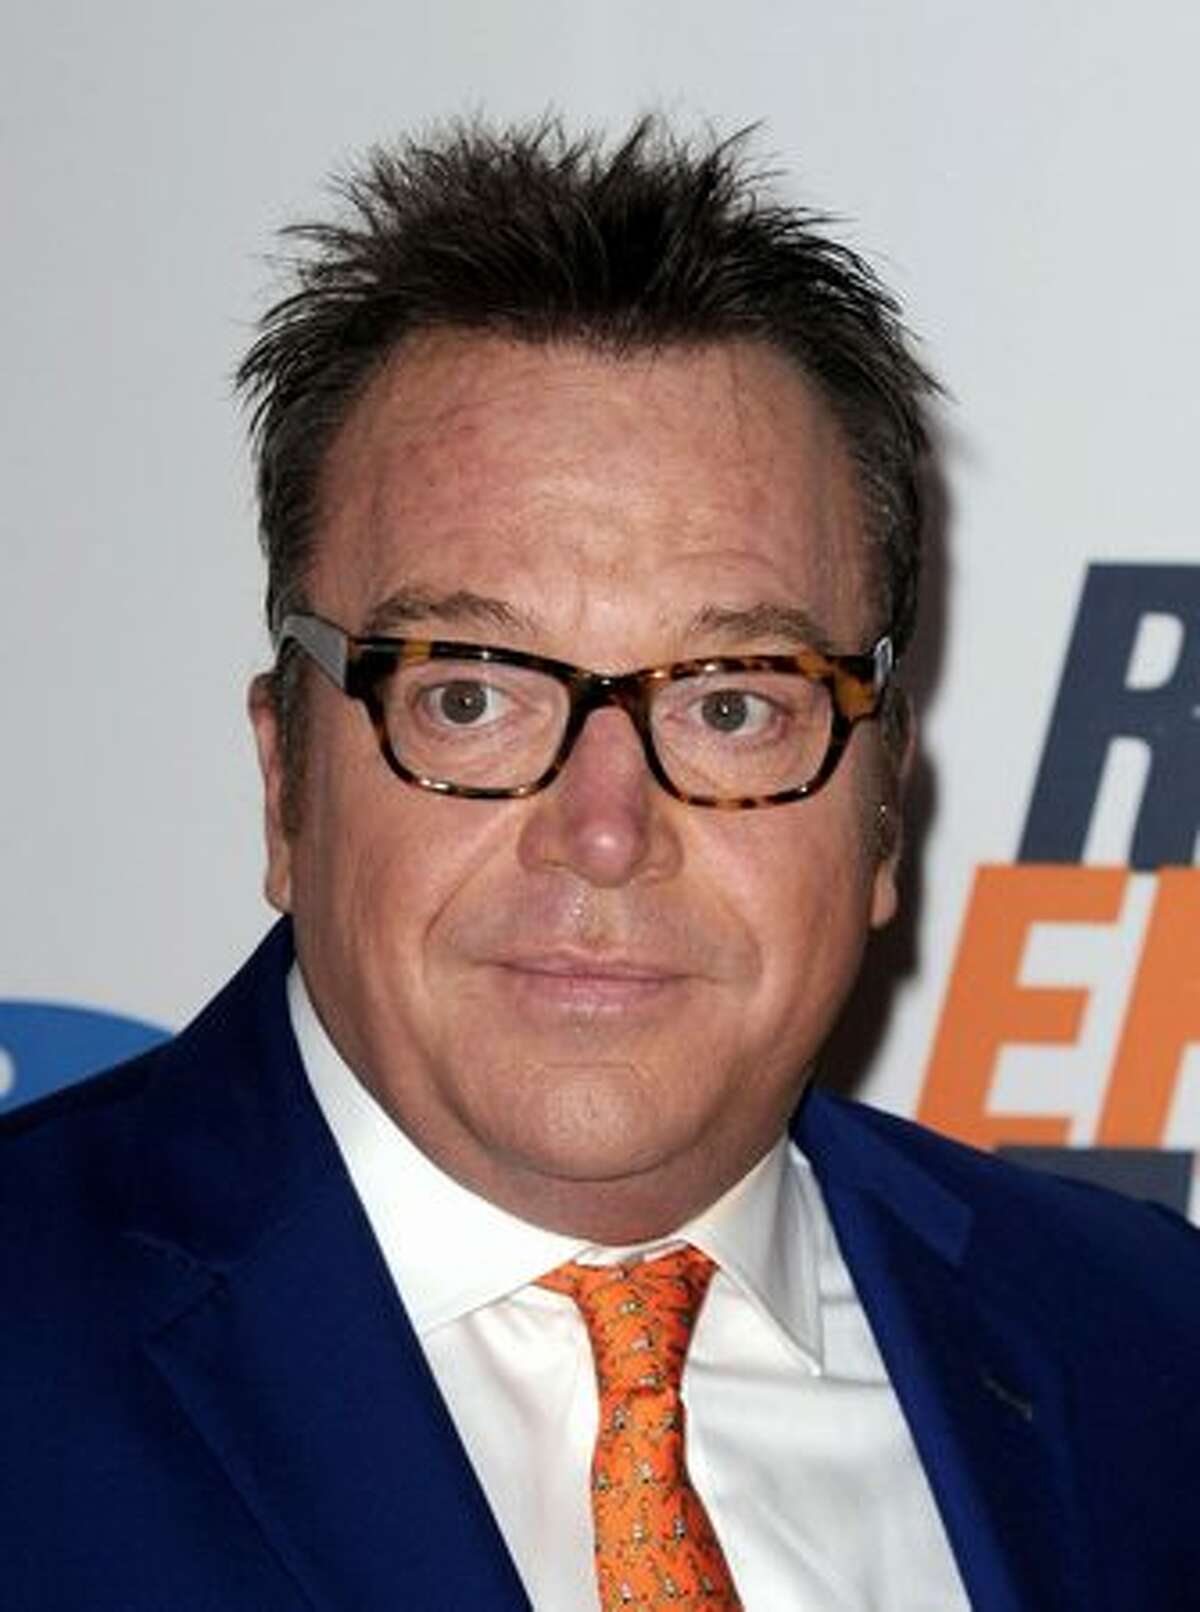 Tom Arnold, May 7, 2010, age 51.